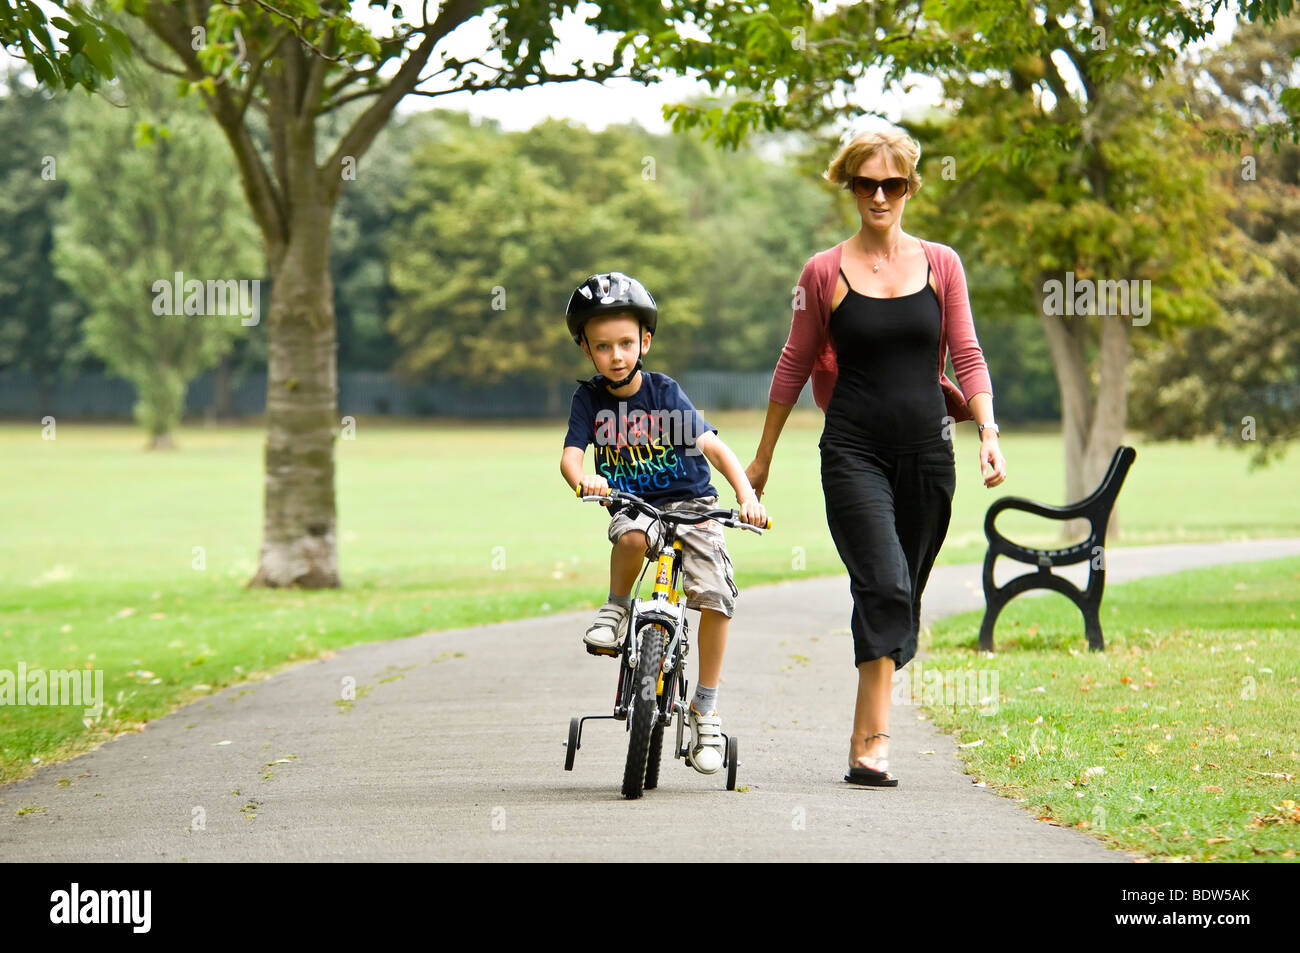 Horizontal close up portrait of a young mum helping her son learn to ride a bike with stabilisers in the park Stock Photo